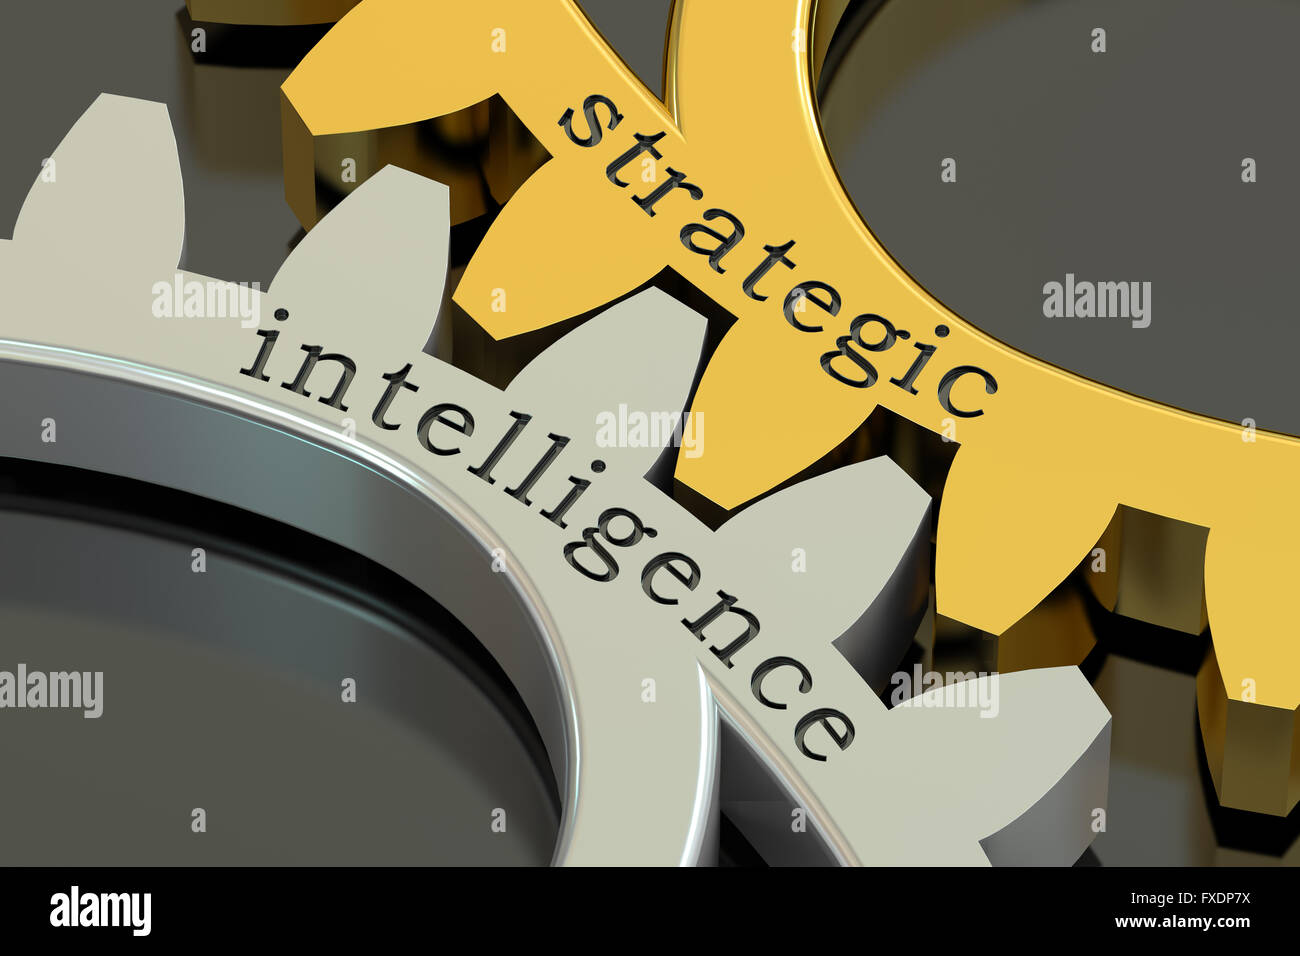 Strategic Intelligence, 3D rendering concept on the gearwheels Stock Photo